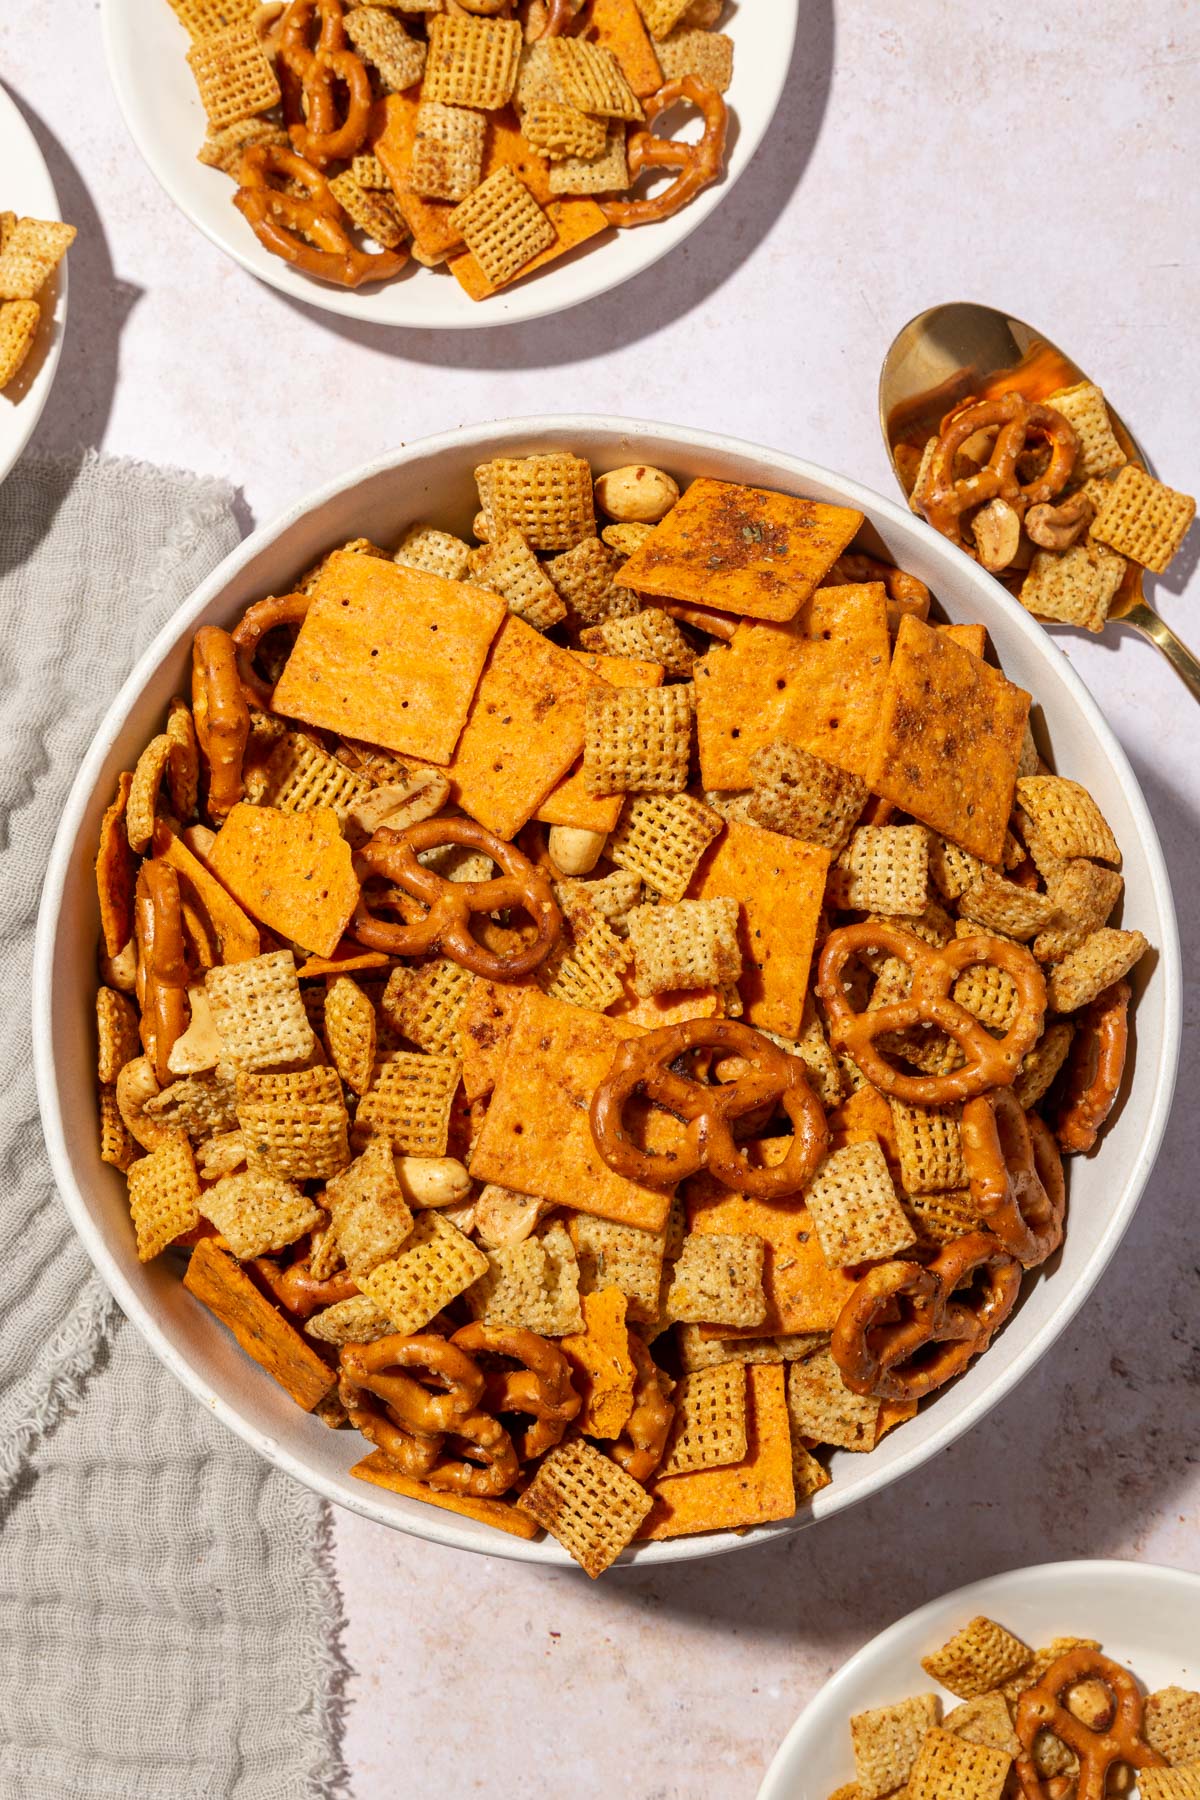 A large serving bowl with gluten-free chex mix in it with appetizer plates filled with snack mix to the side and a serving spoon.